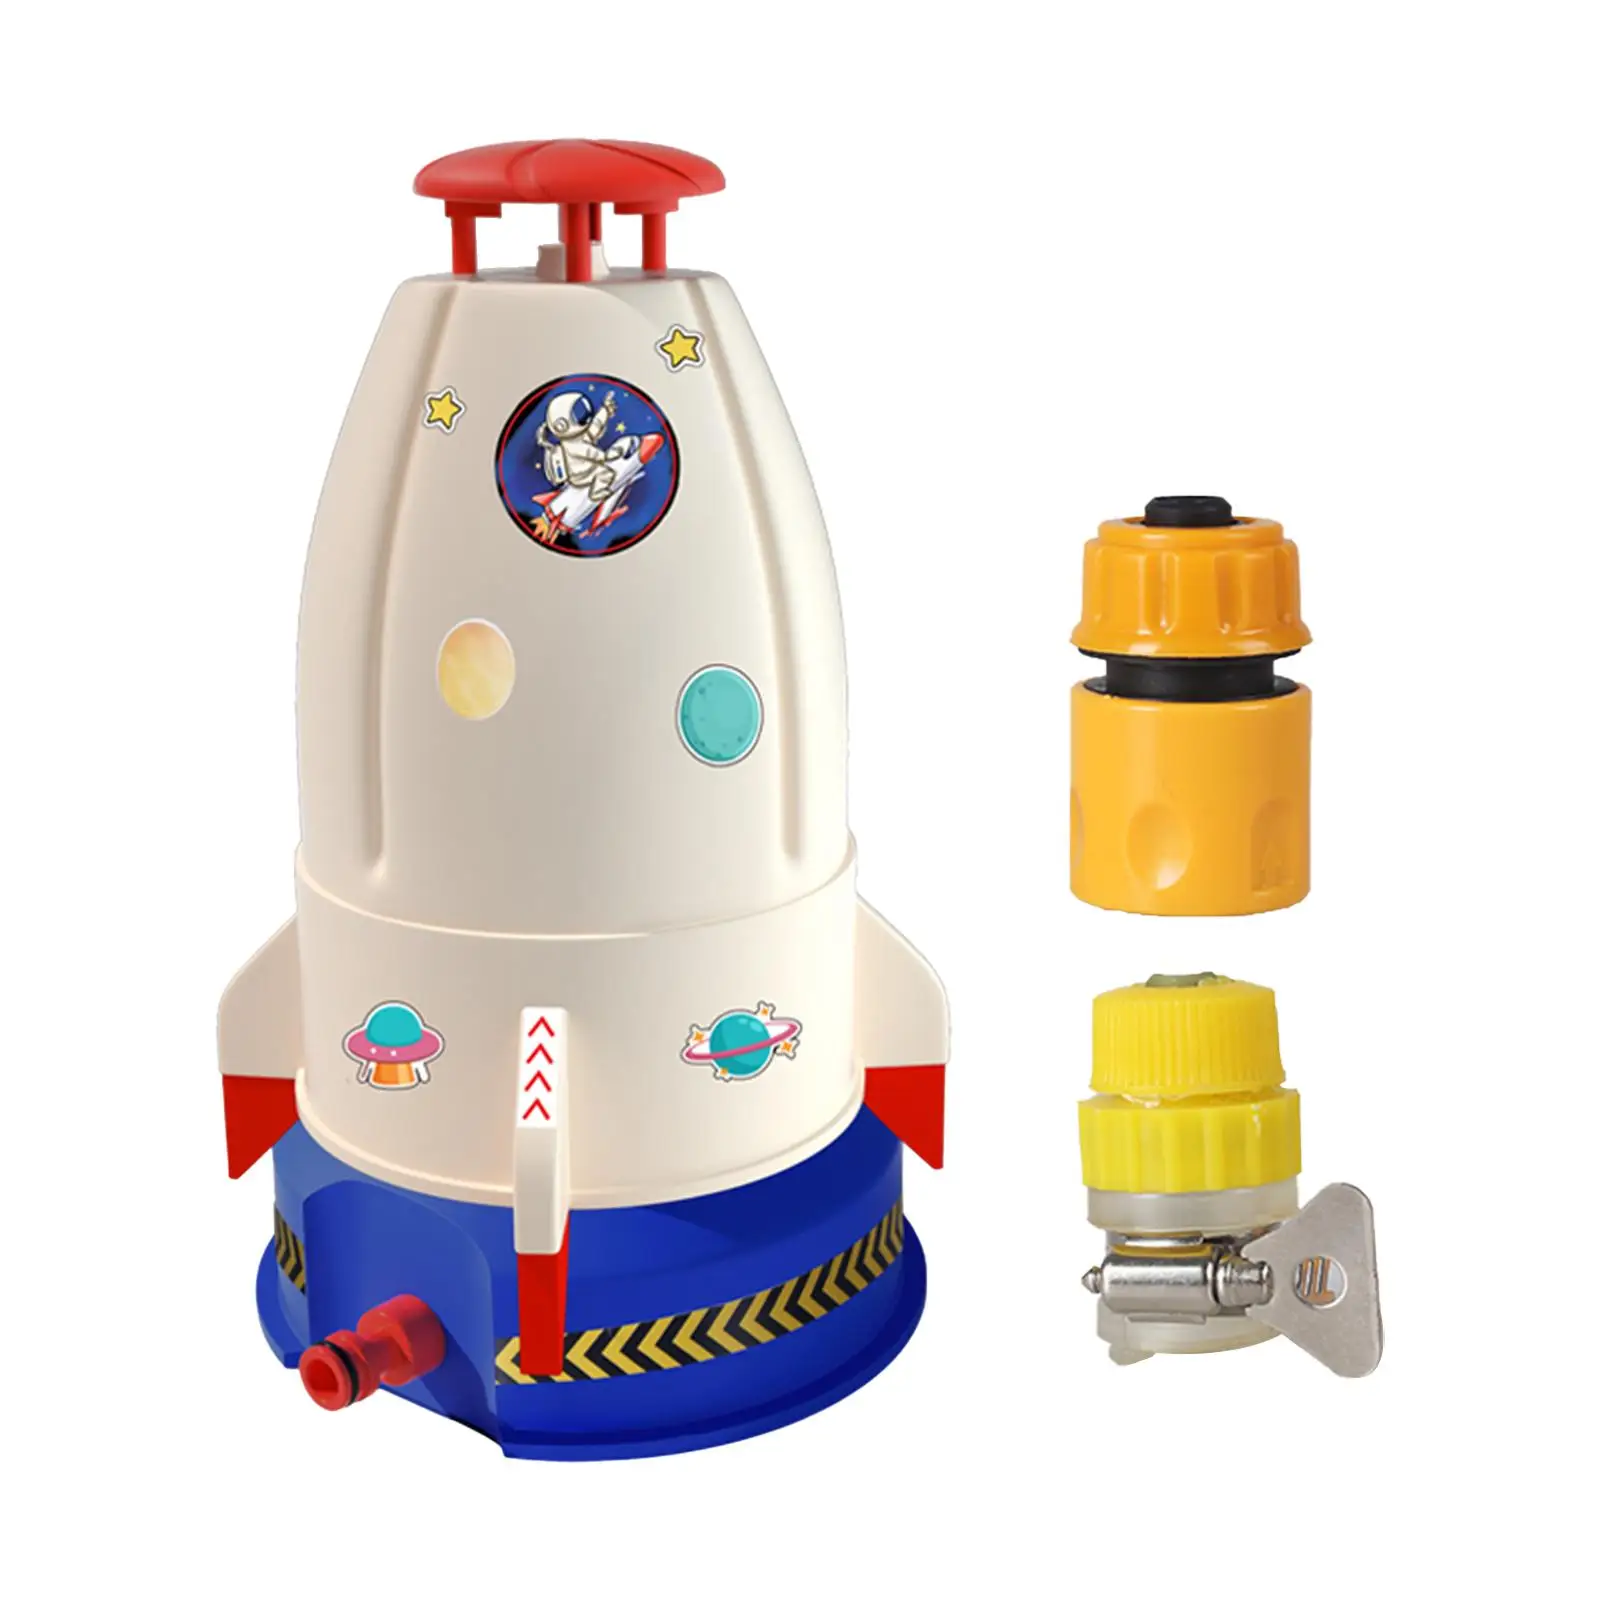 Rocket Water Toys Reach to 2meter Altitudes Summer Water Sprayer Toy for Holiday